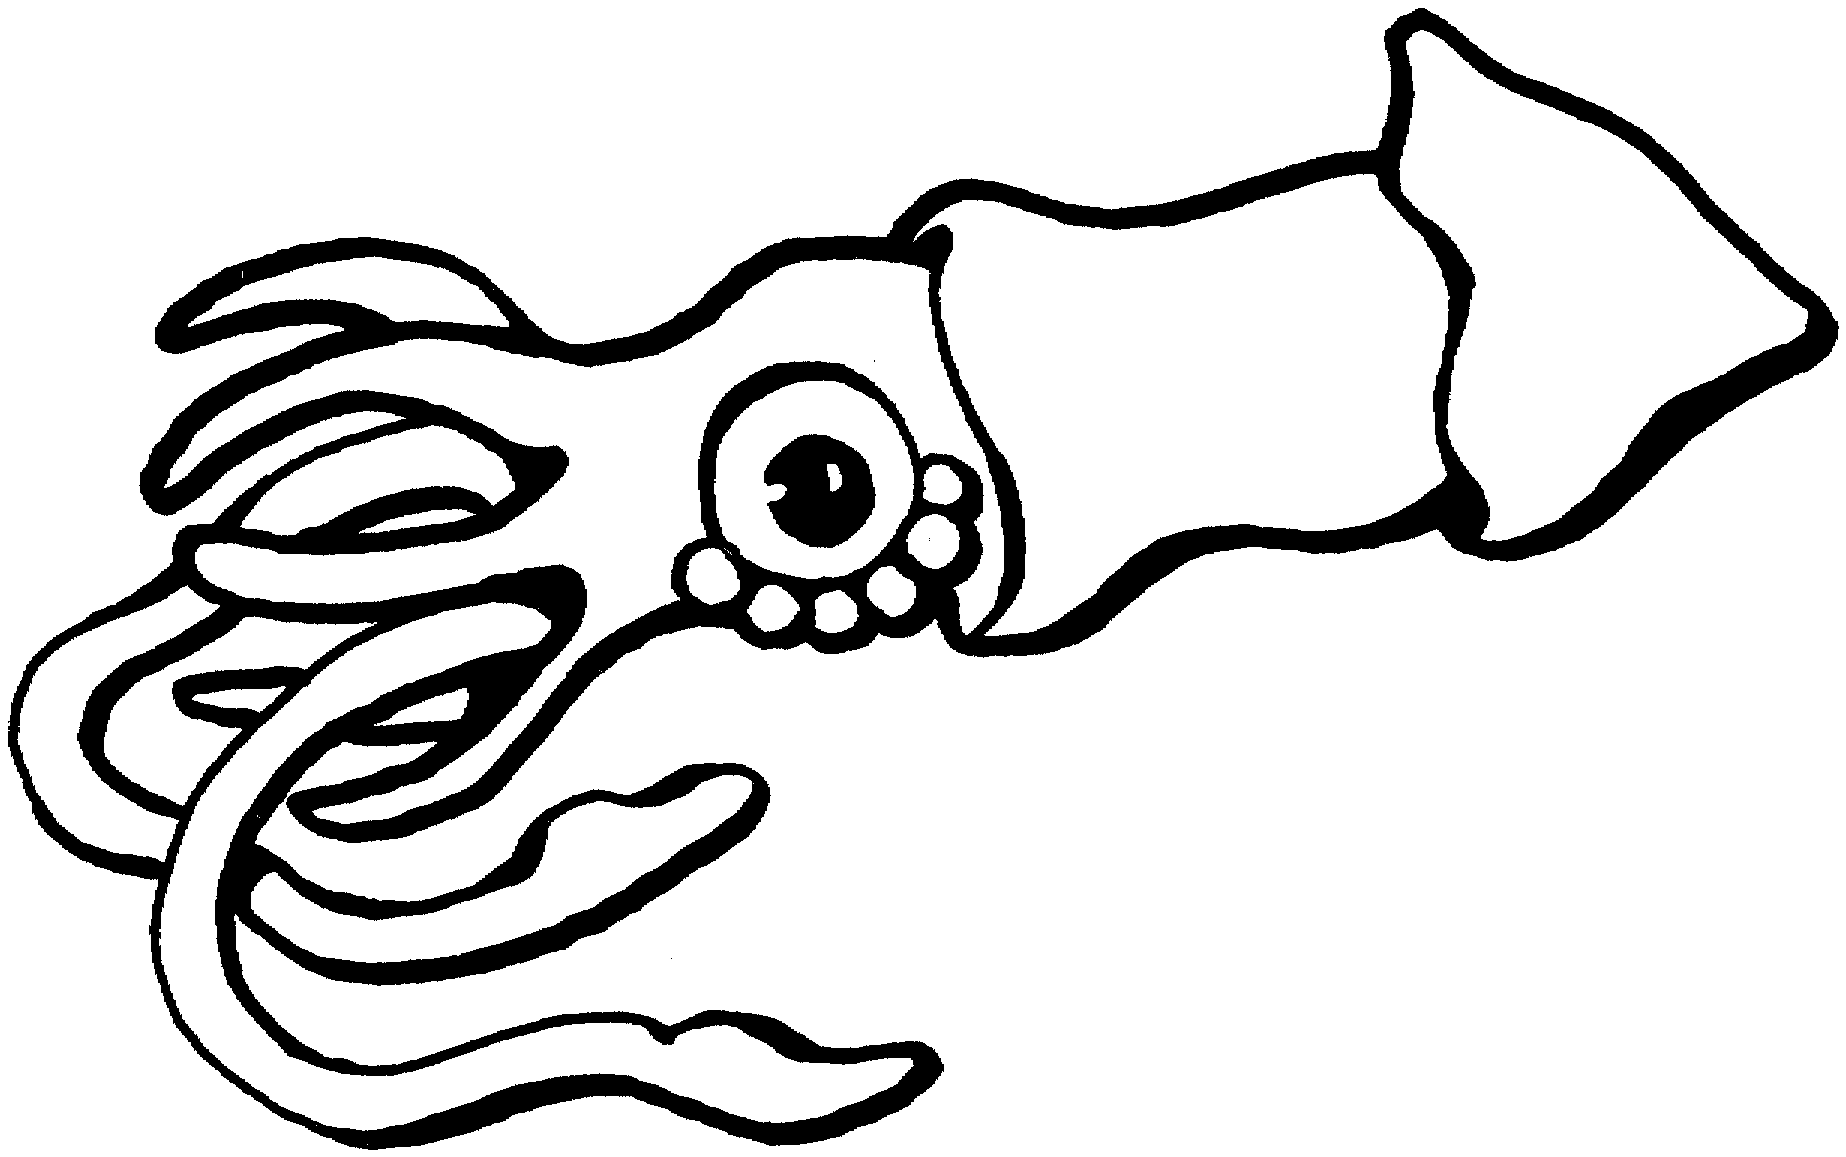 giant squid coloring page squid coloring pages getcoloringpagescom page giant squid coloring 